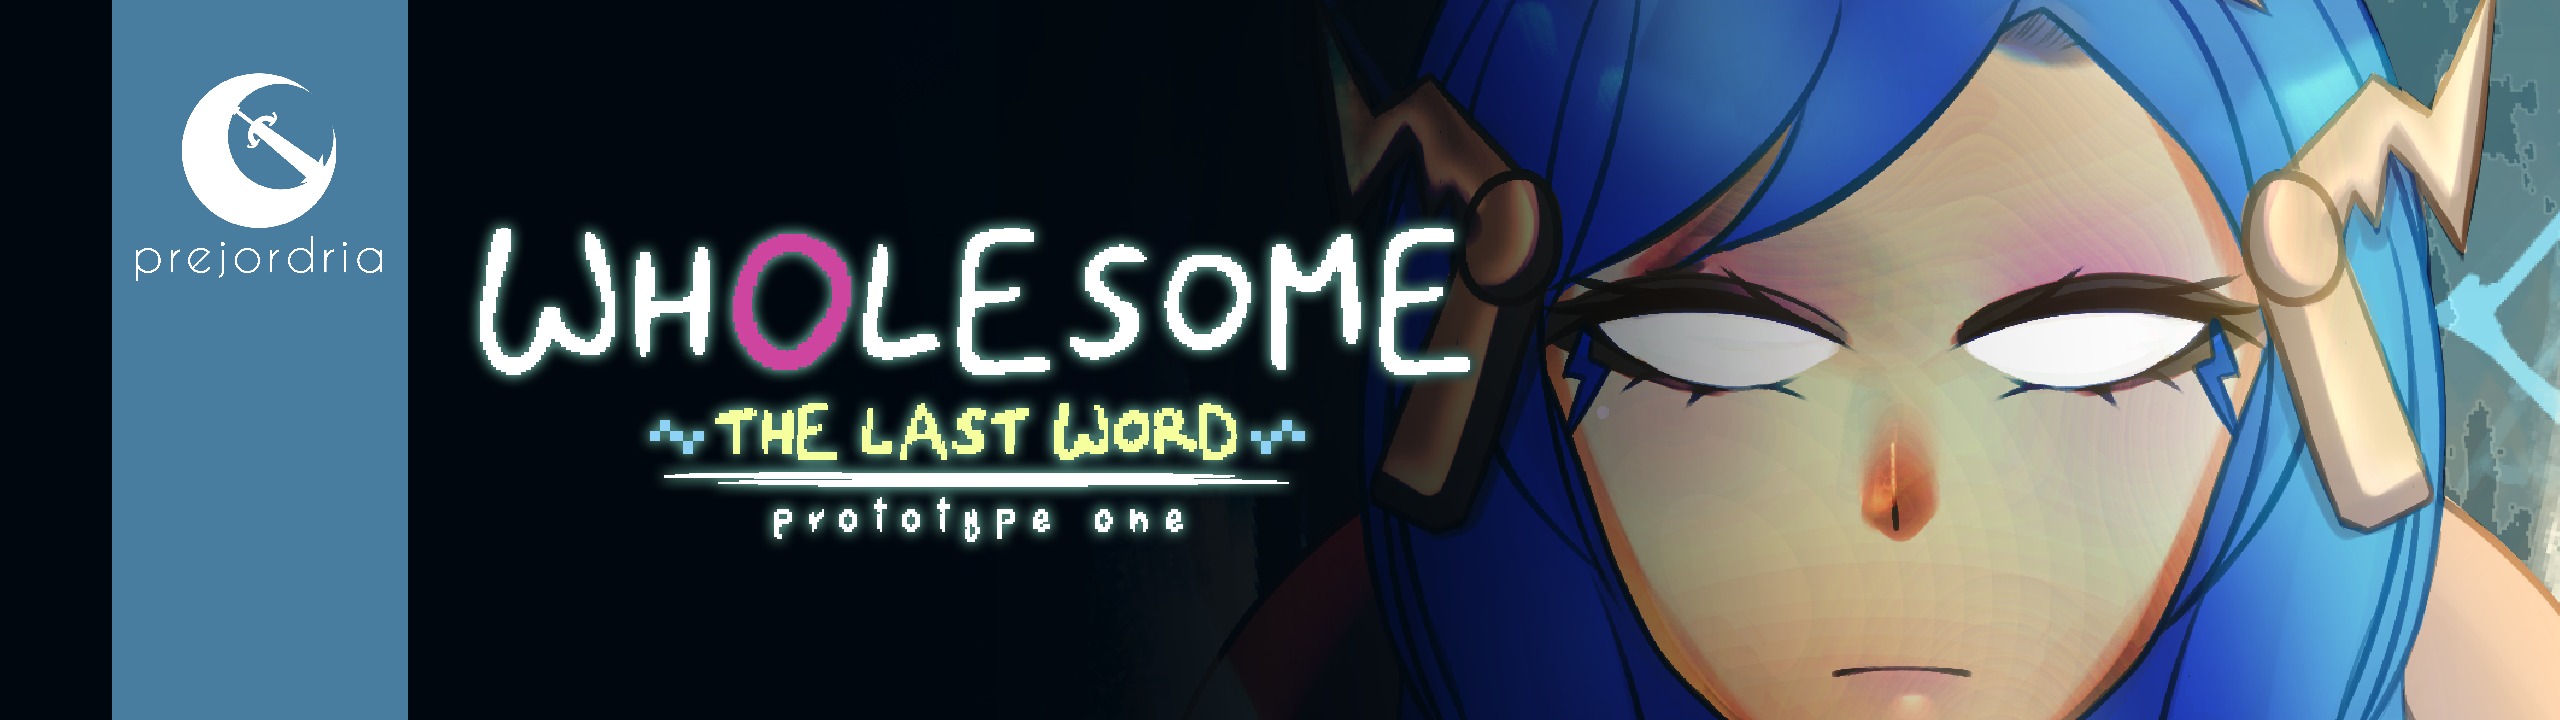 Wholesome: The Last Word ★